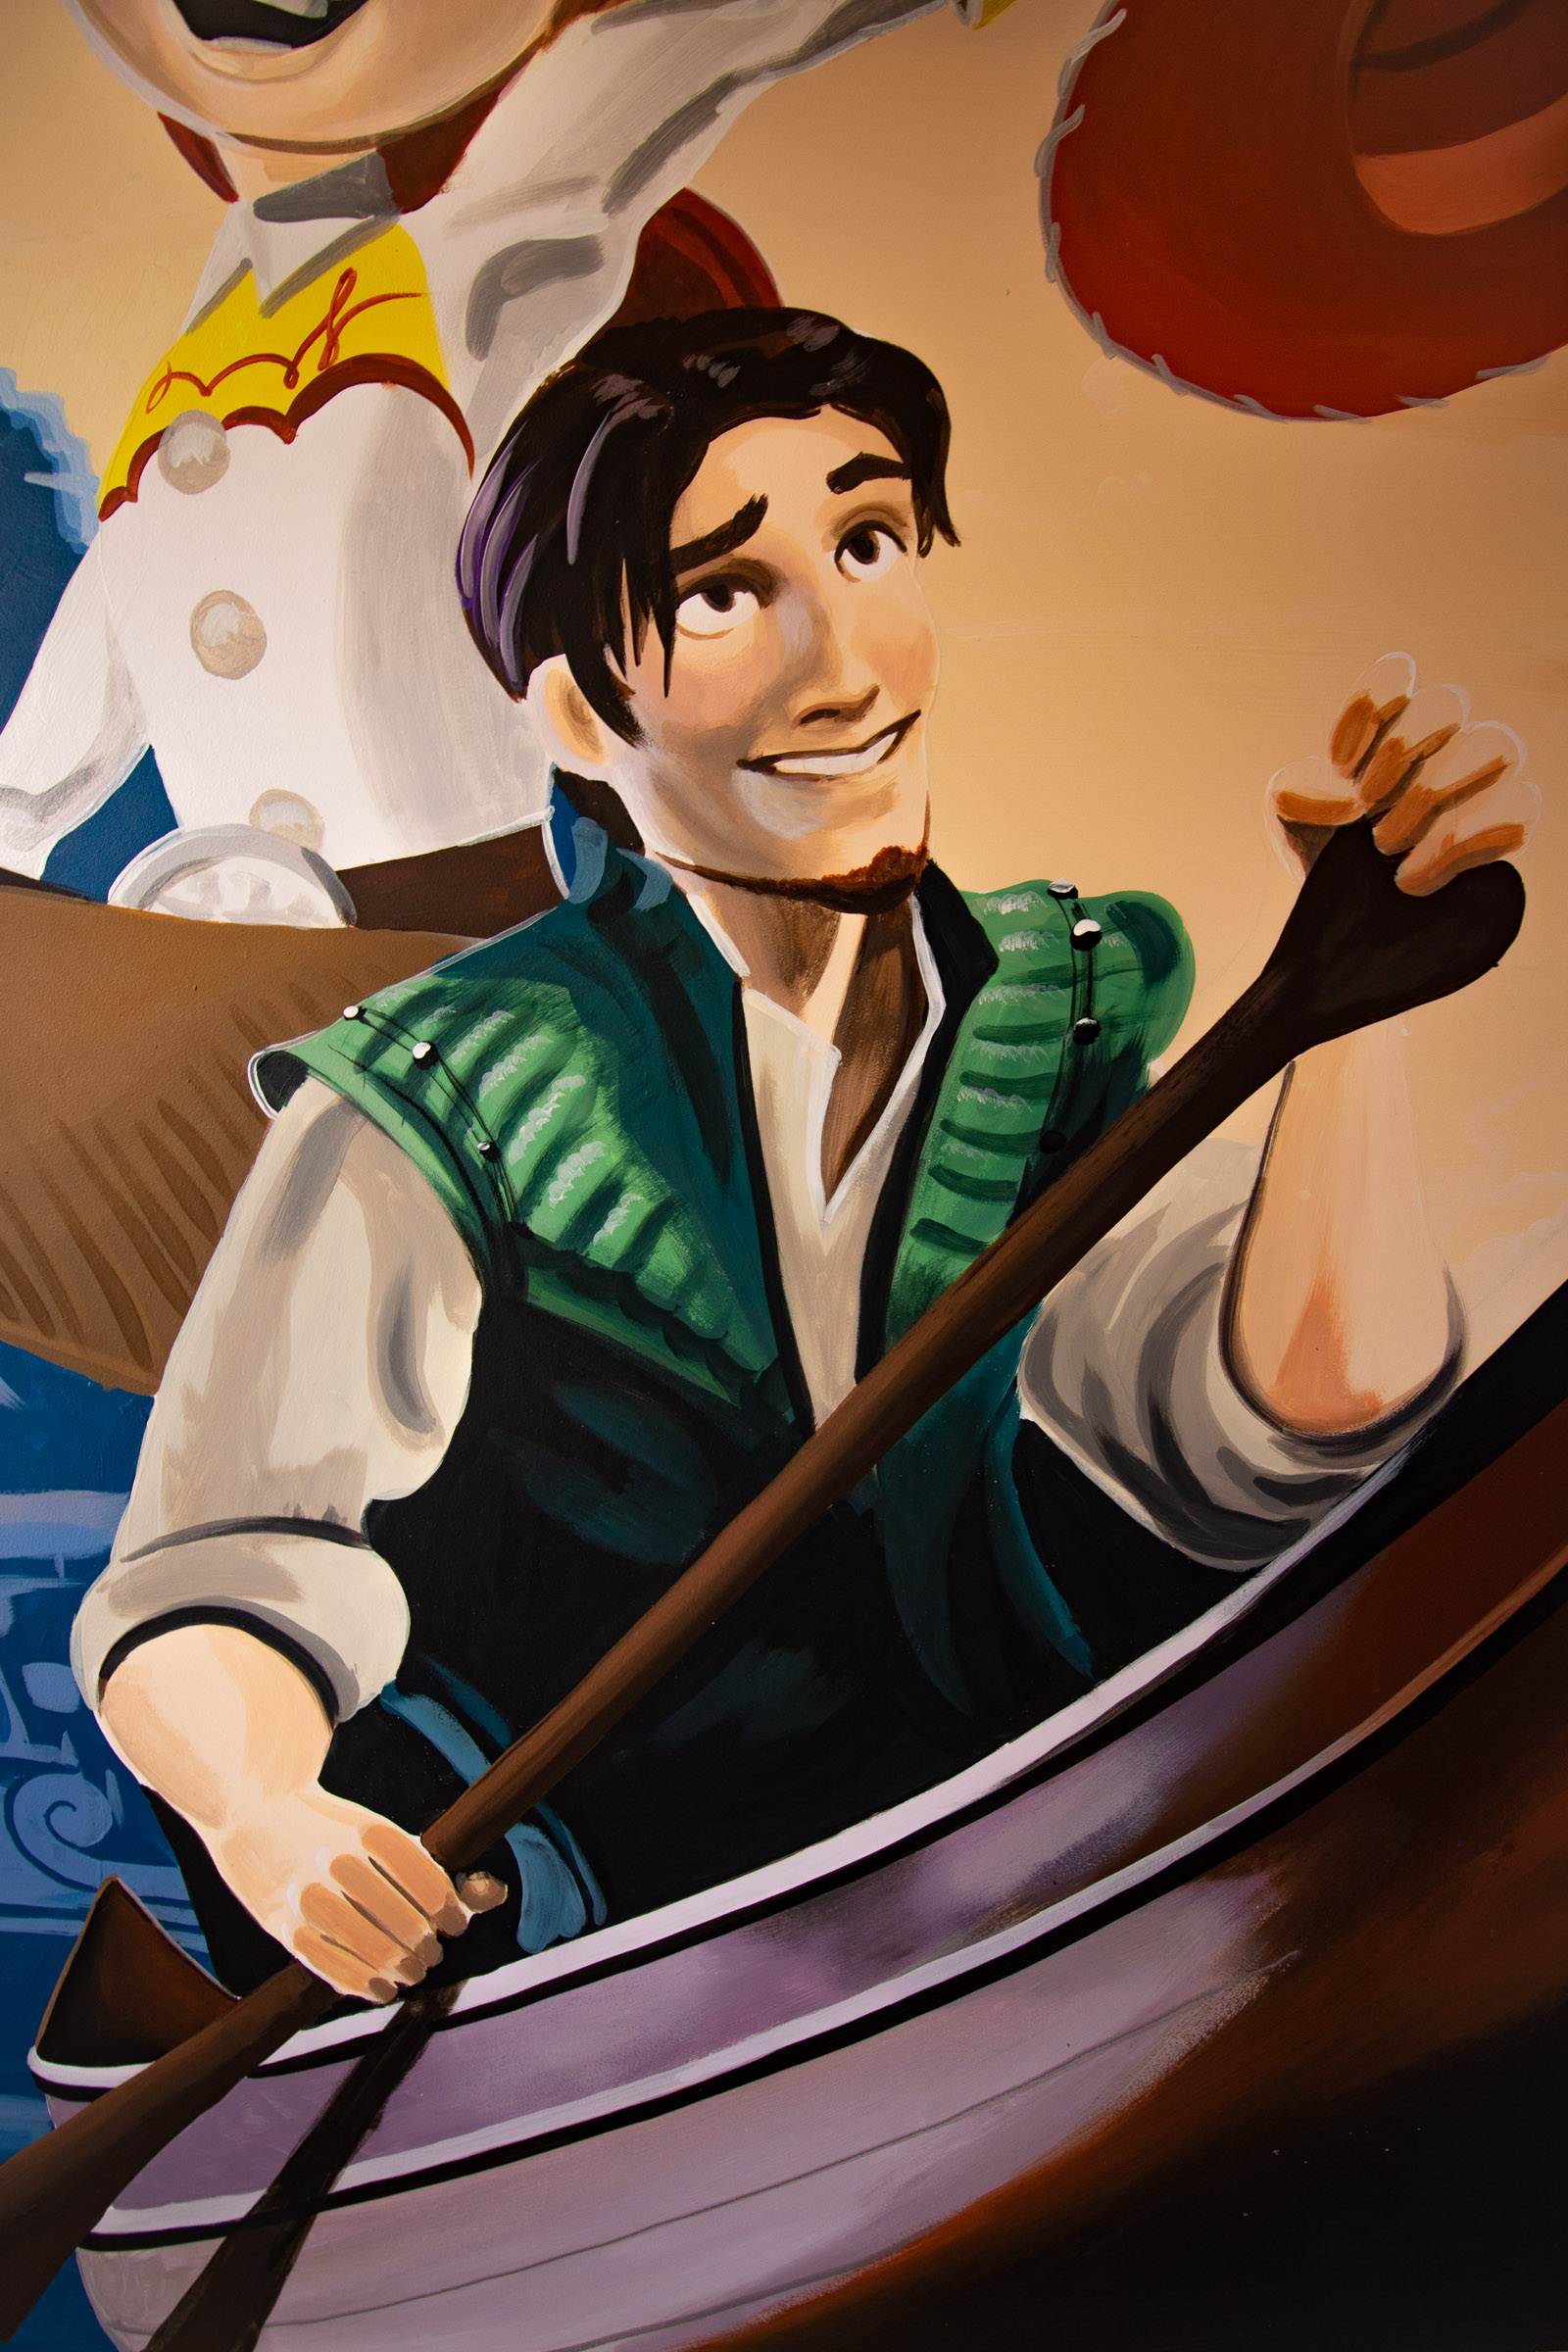 Flynn Rider takes centre stage